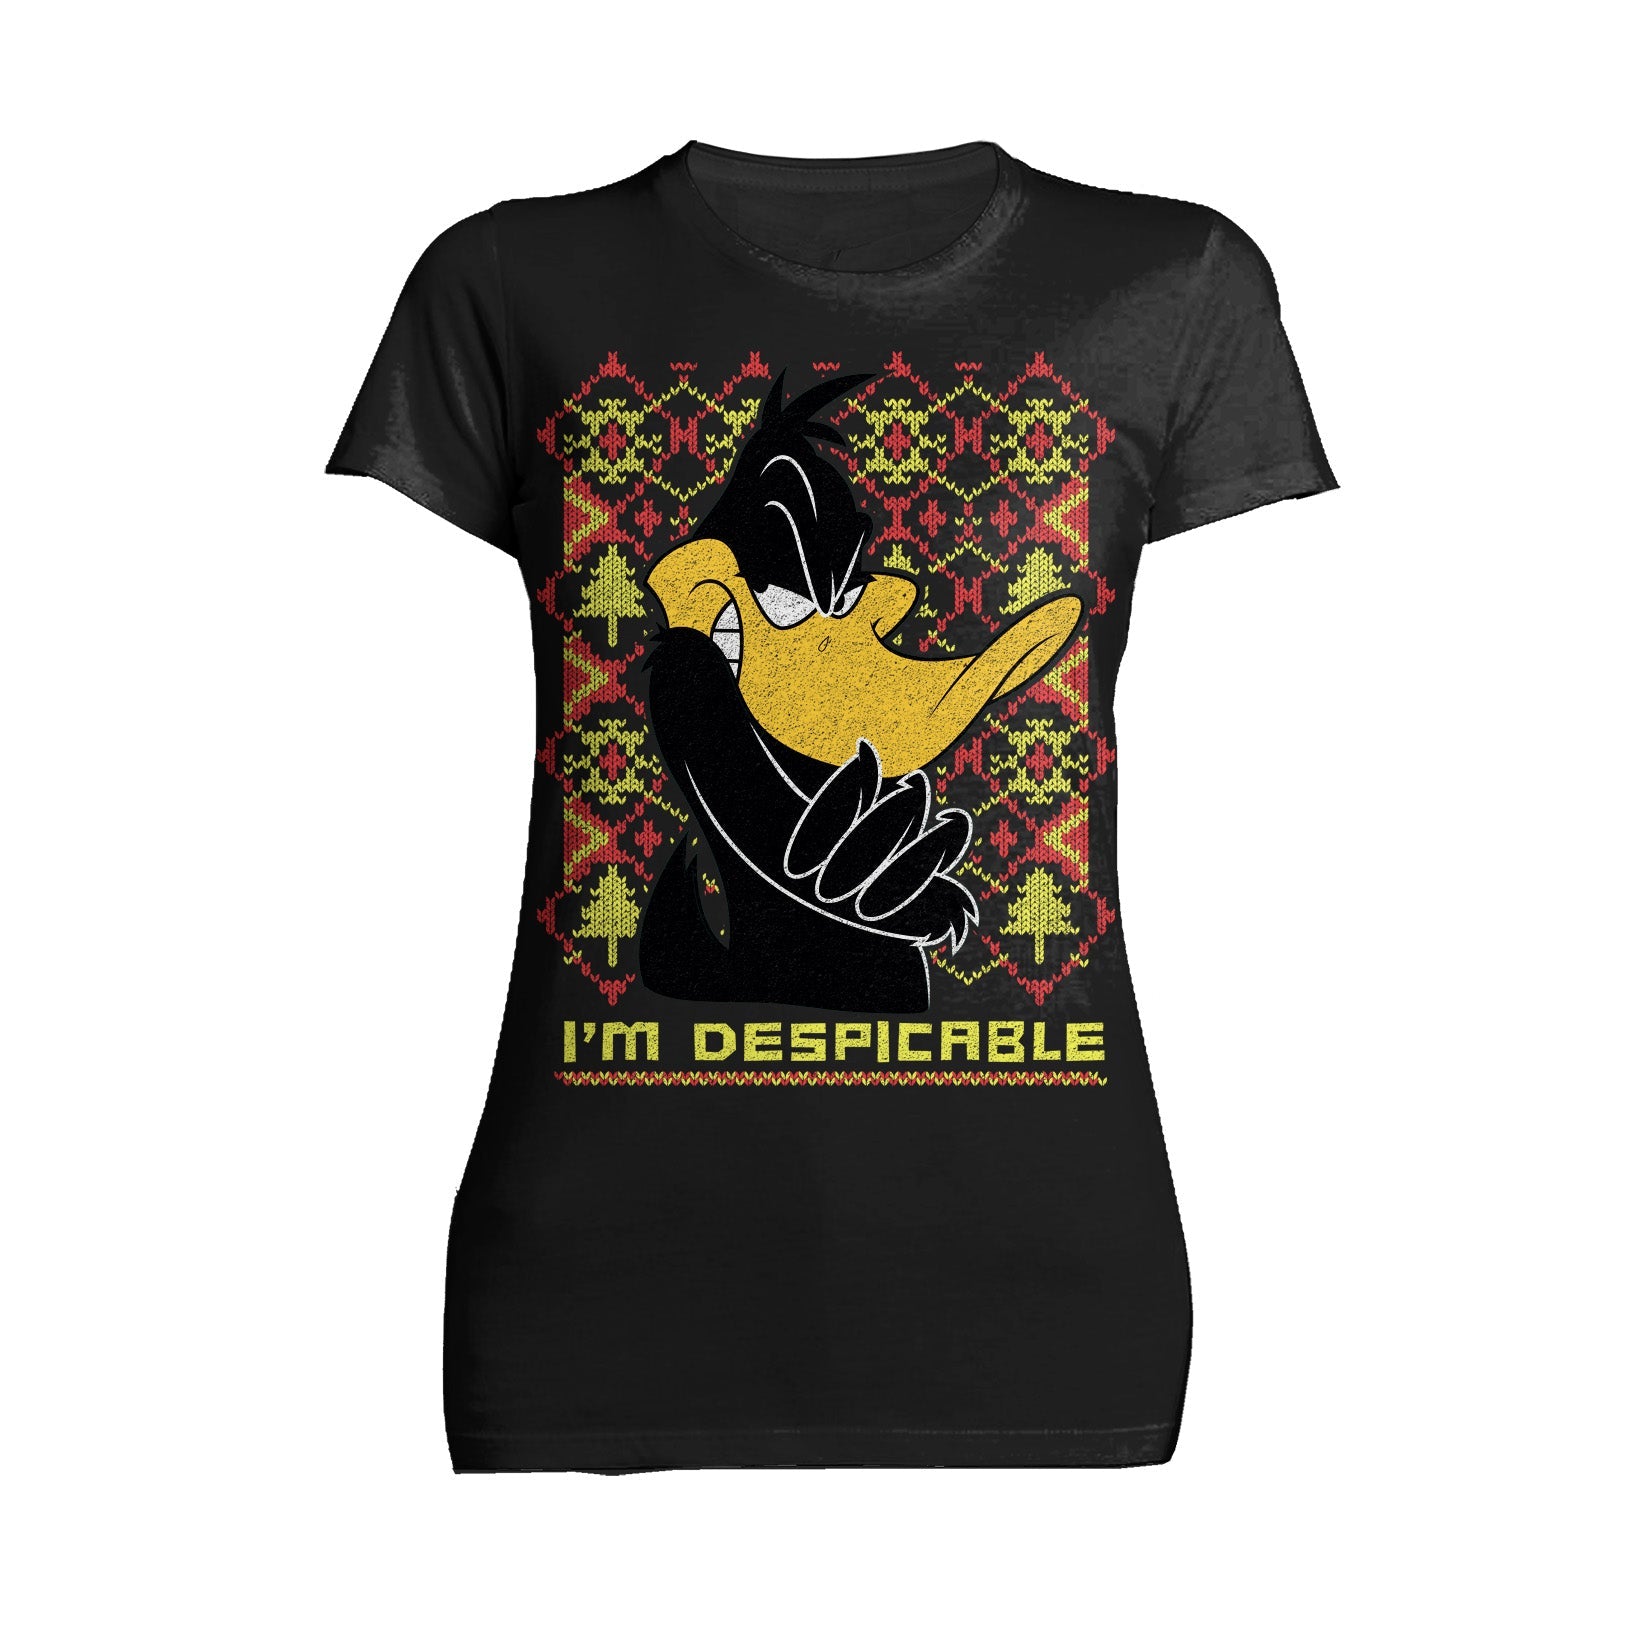 Looney Tunes Daffy Duck Xmas Despicable Official Women's T-Shirt